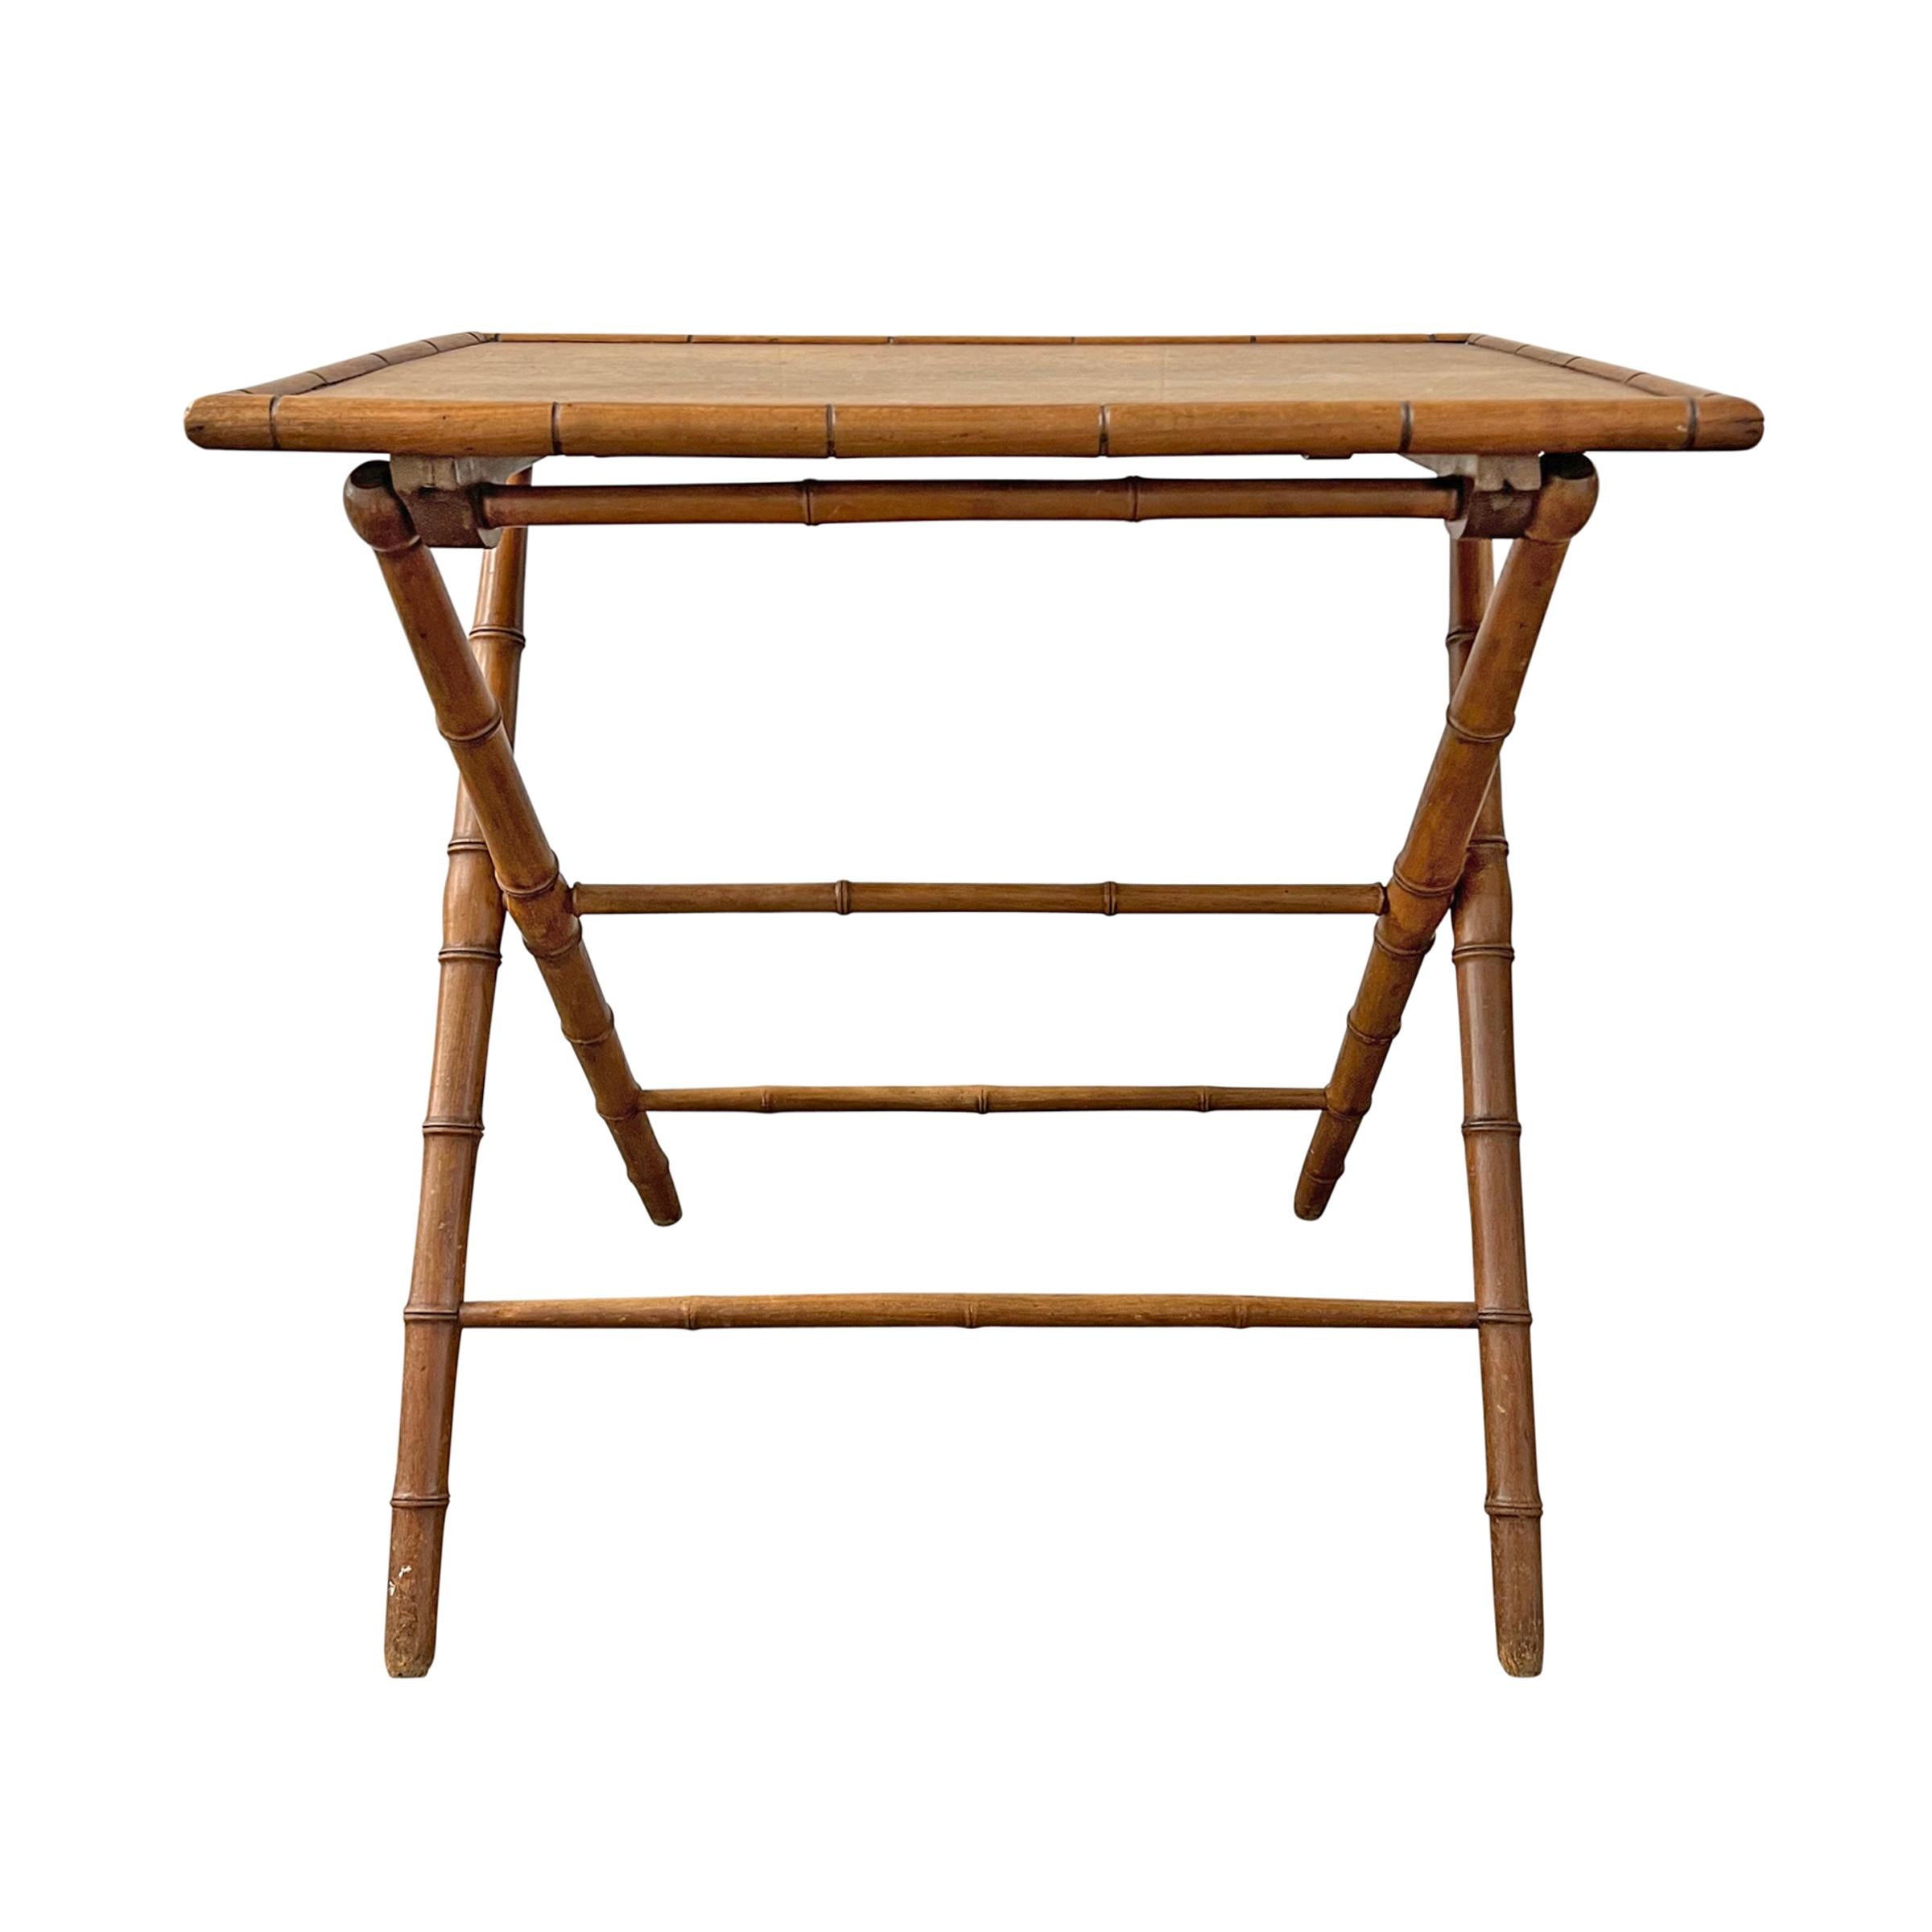 Rustic Early 20th Century, French, Folding Table